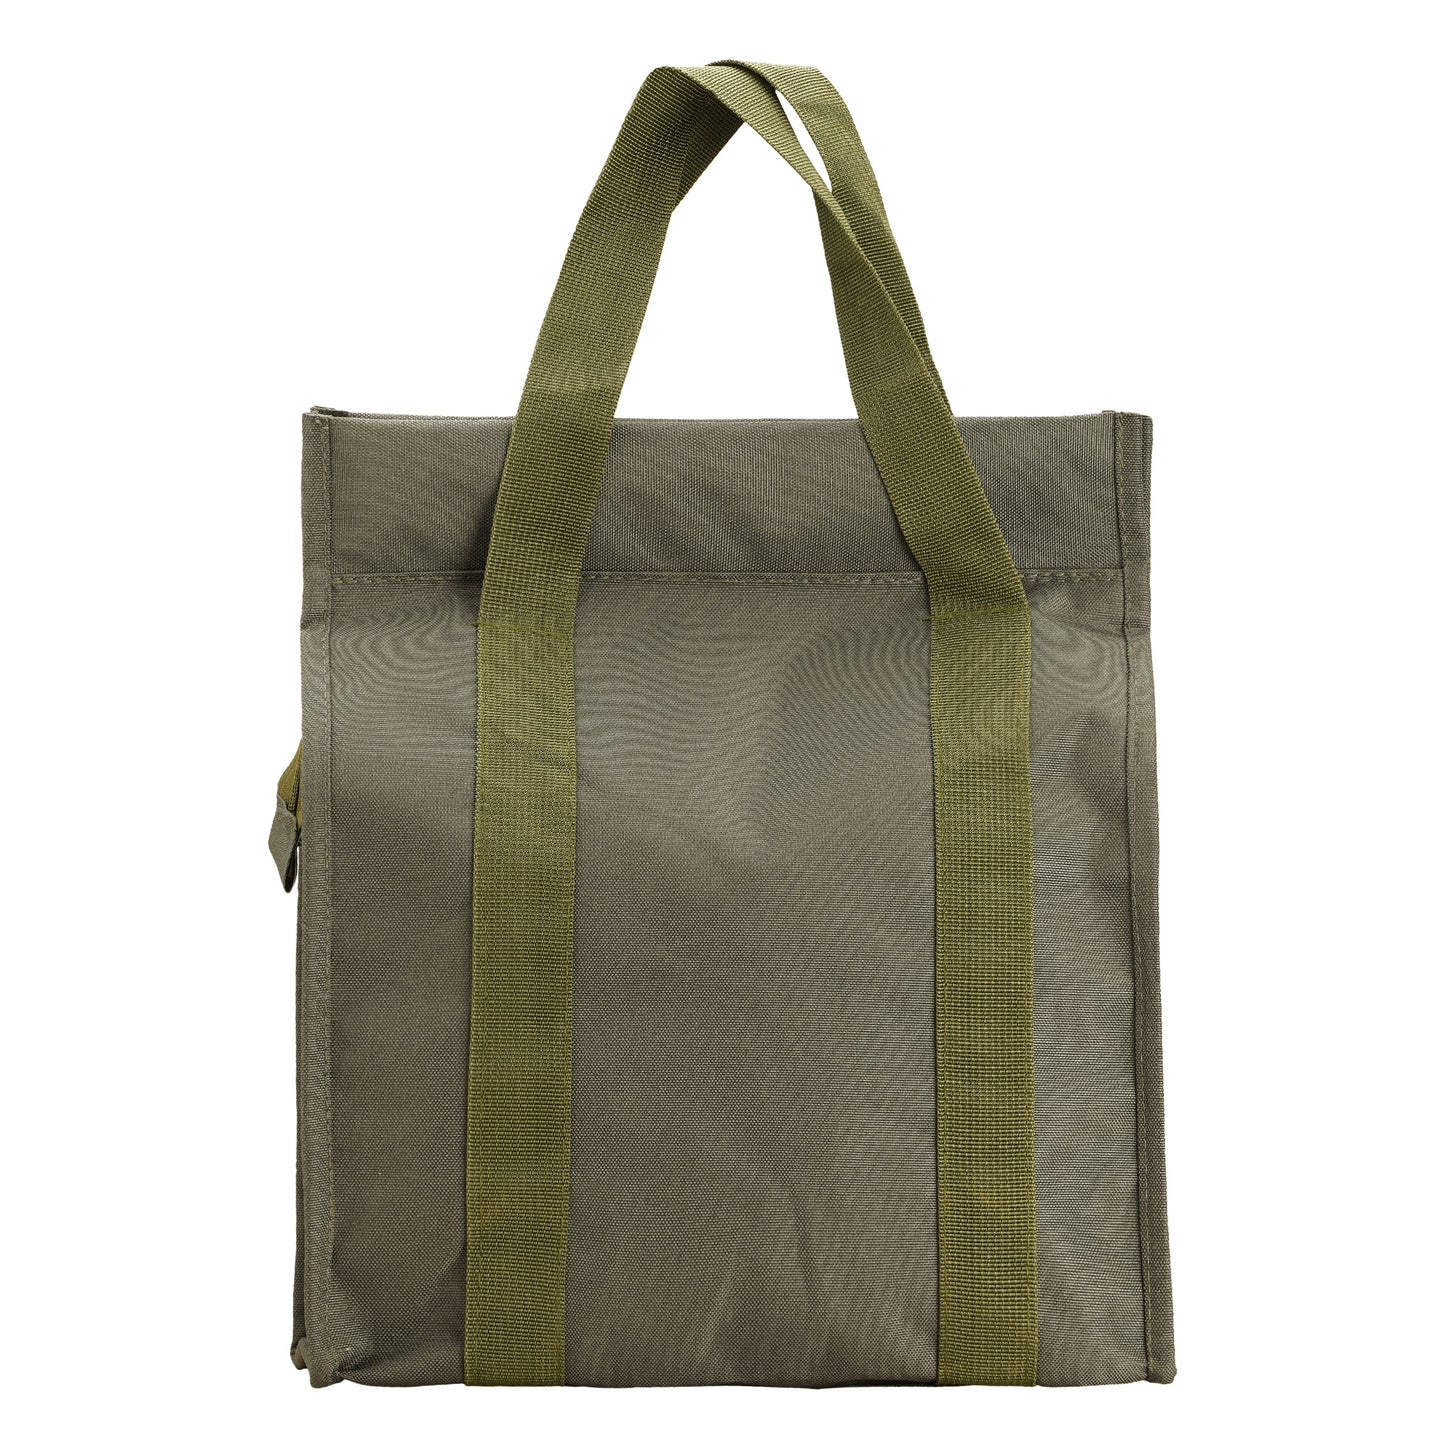 Thaili No.6 Tiffin Bag 16in x 13in x 6in TB-405 - Railway Running Staff - Extra Large Tiffin Bags Dhariwal 